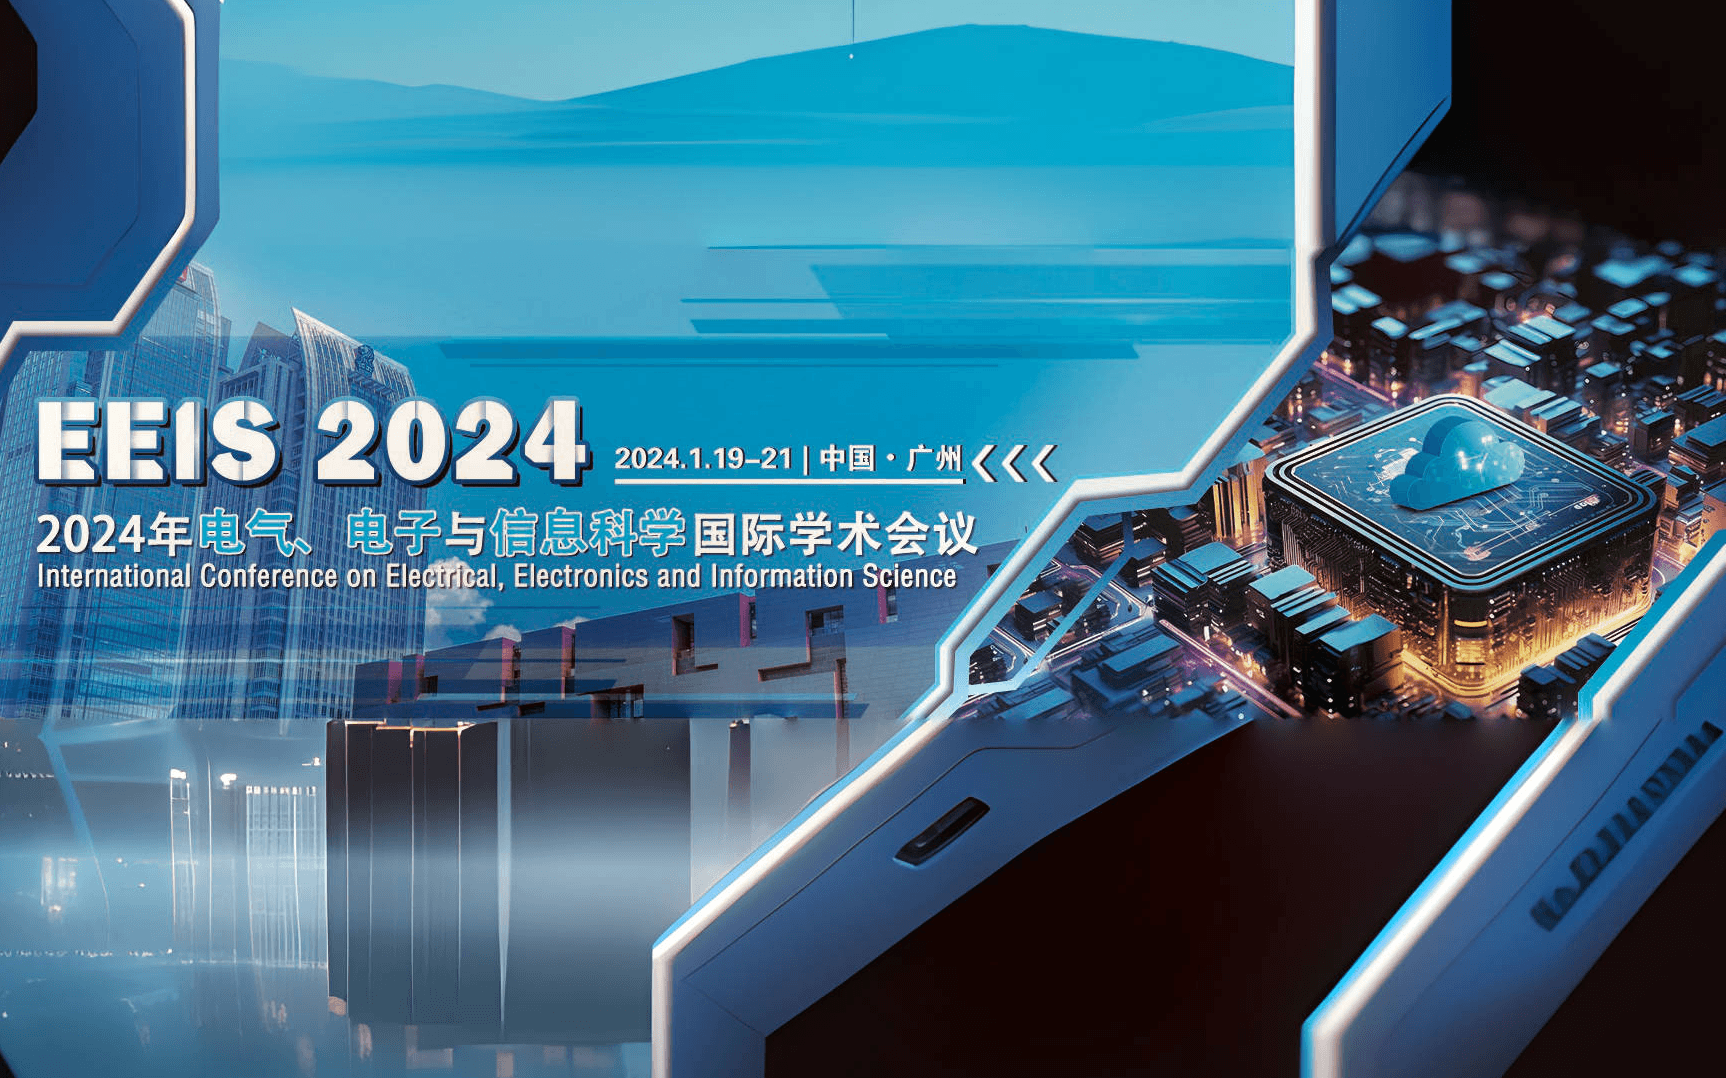 The 2024 International Conference on Electrical, Electronics and Information Science (EEIS 2024)